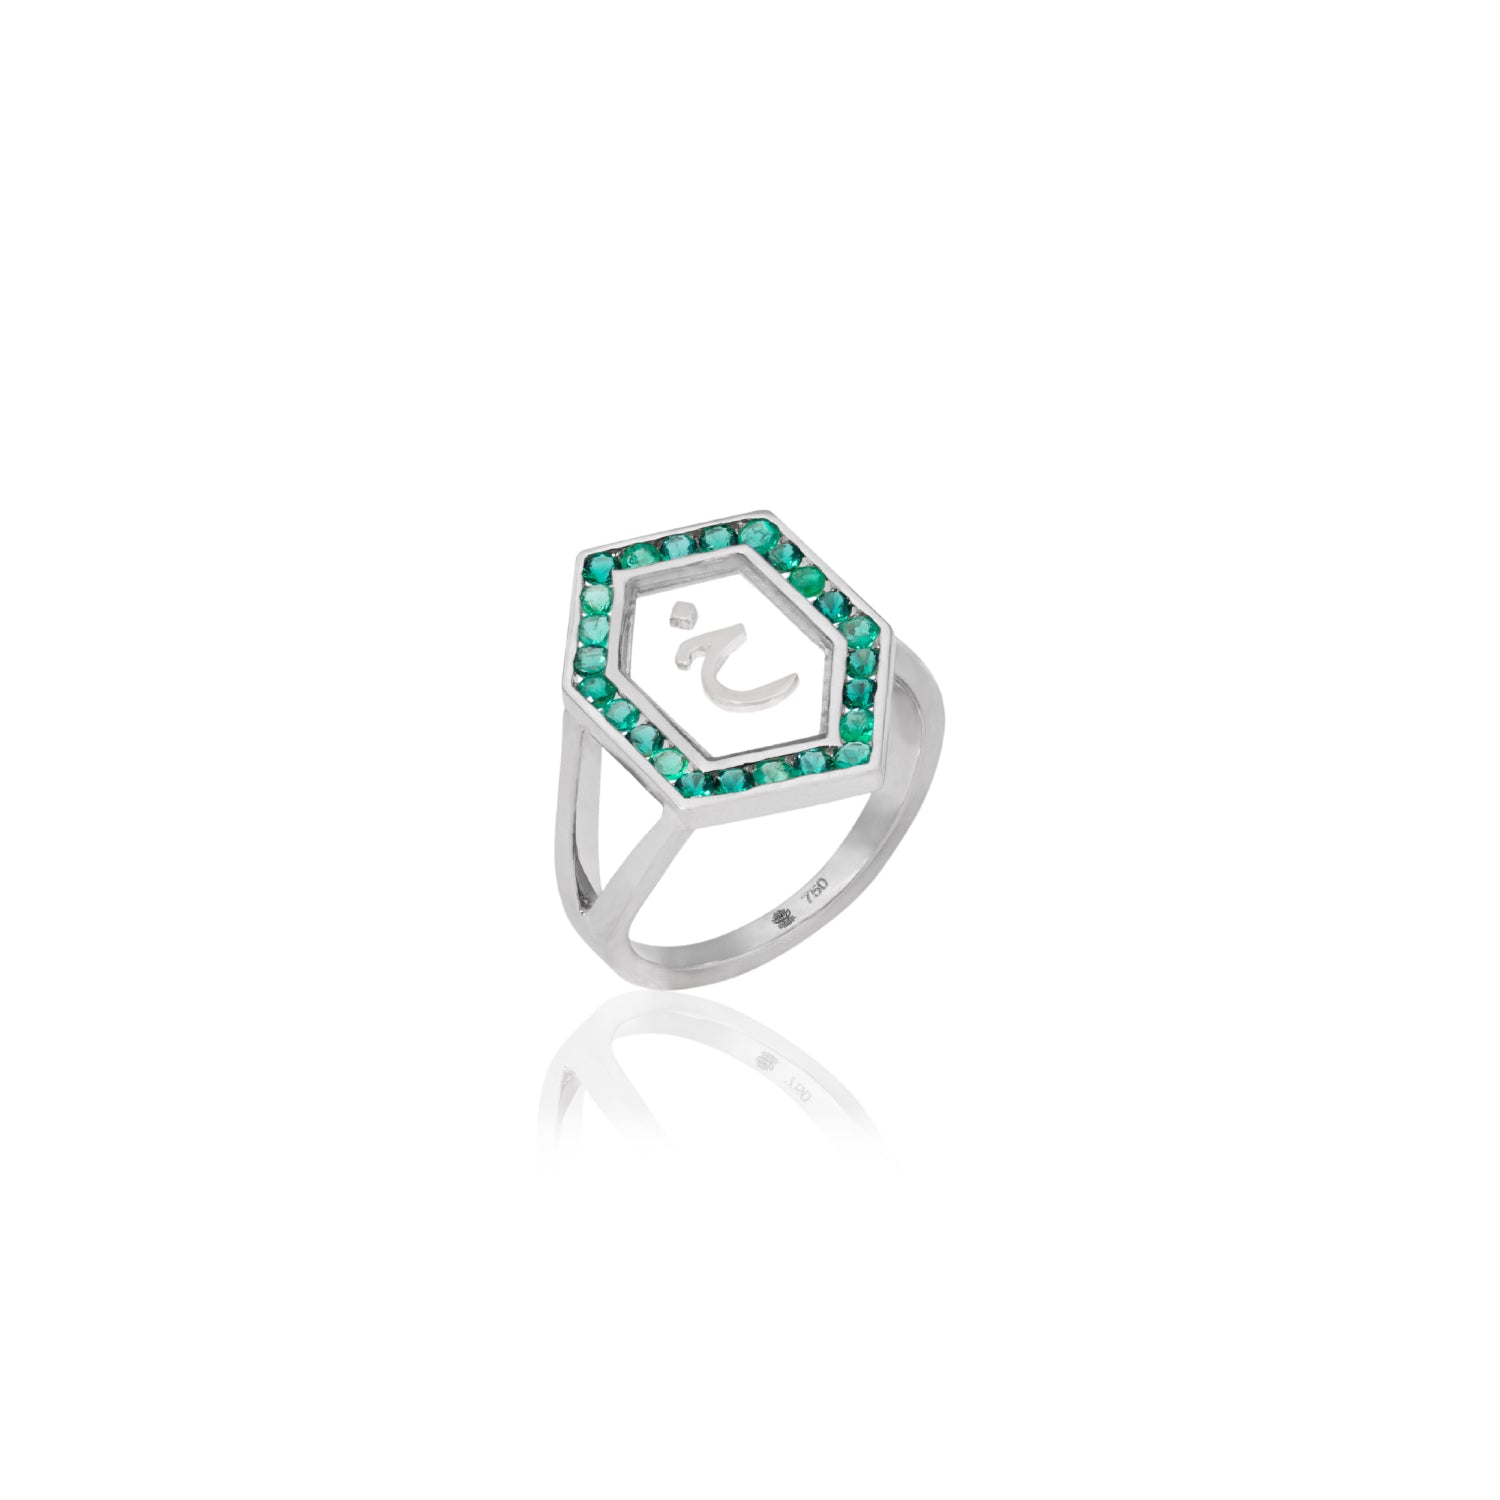 Qamoos 1.0 Letter خ Emerald Ring in White Gold